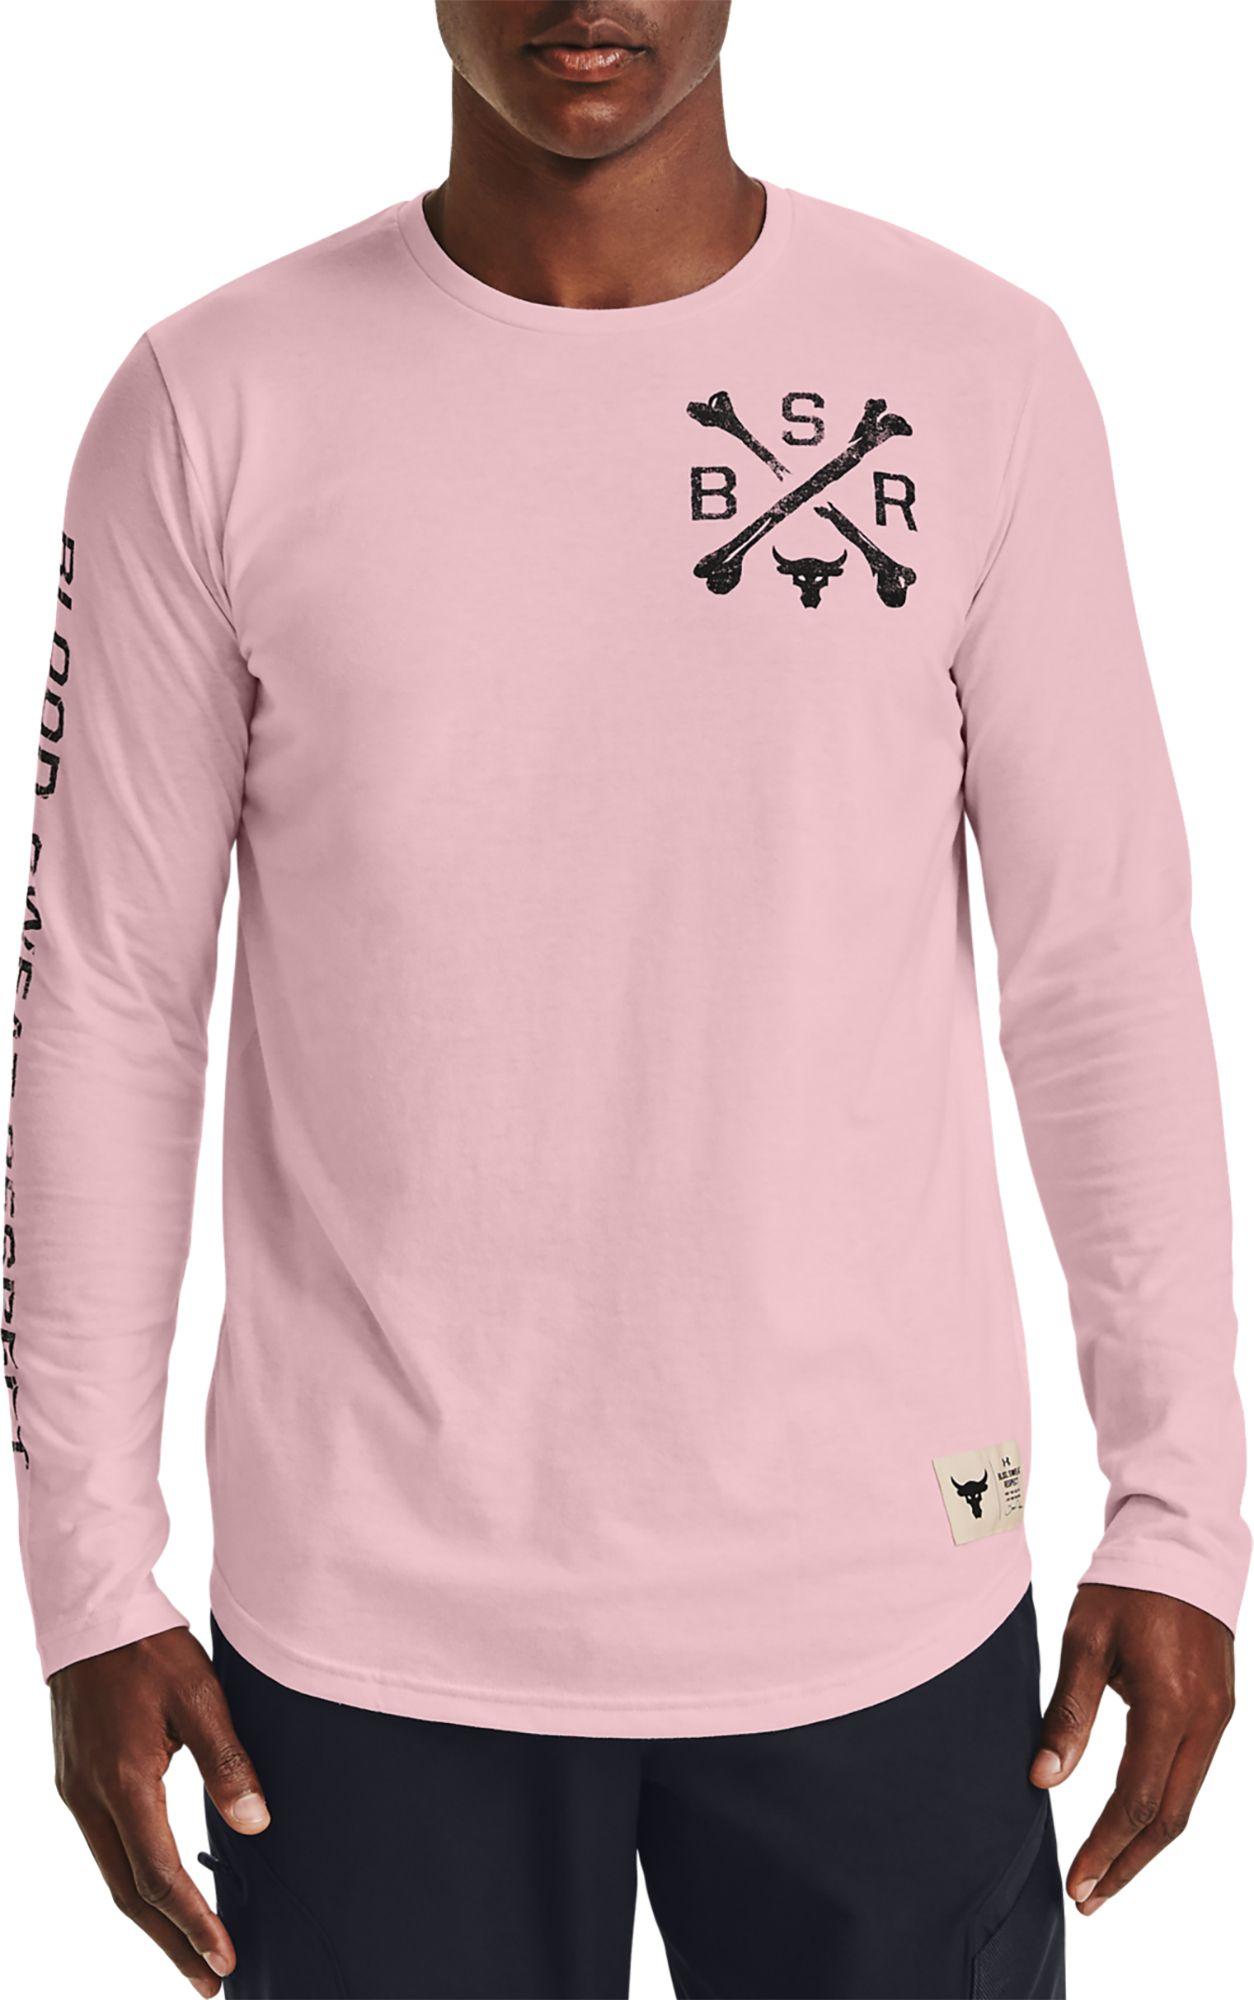 Under Armour Men's Project Rock BSR Blood Sweat Respect Pink Long Sleeve Size M